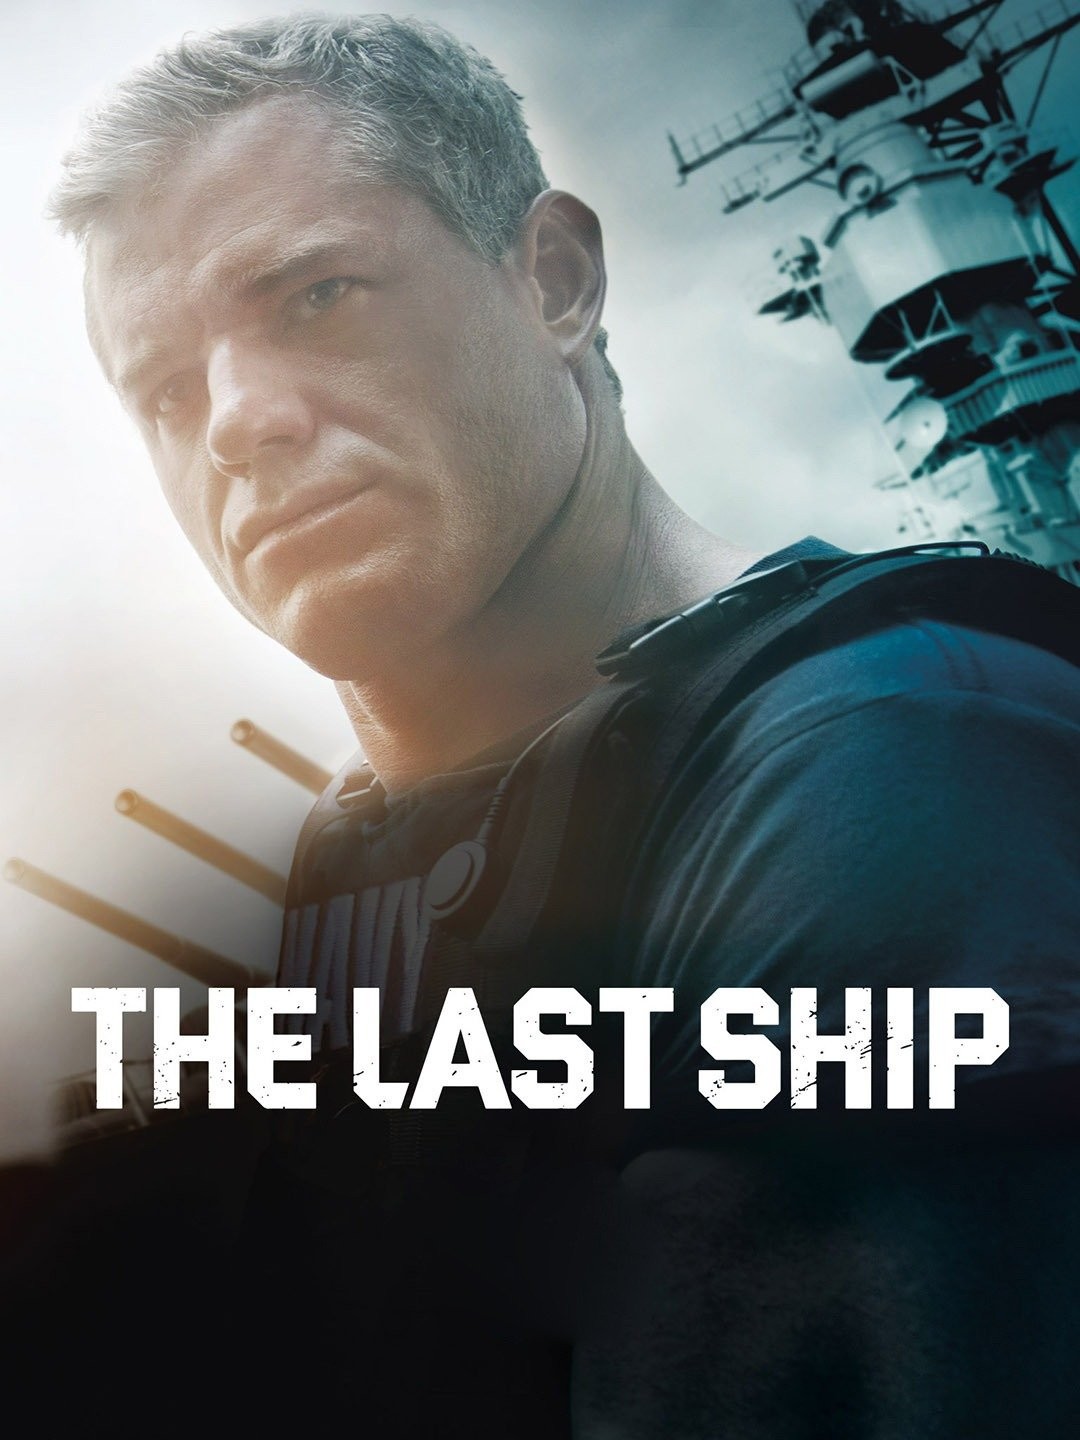 The Last Ship: Pilot Review - IGN